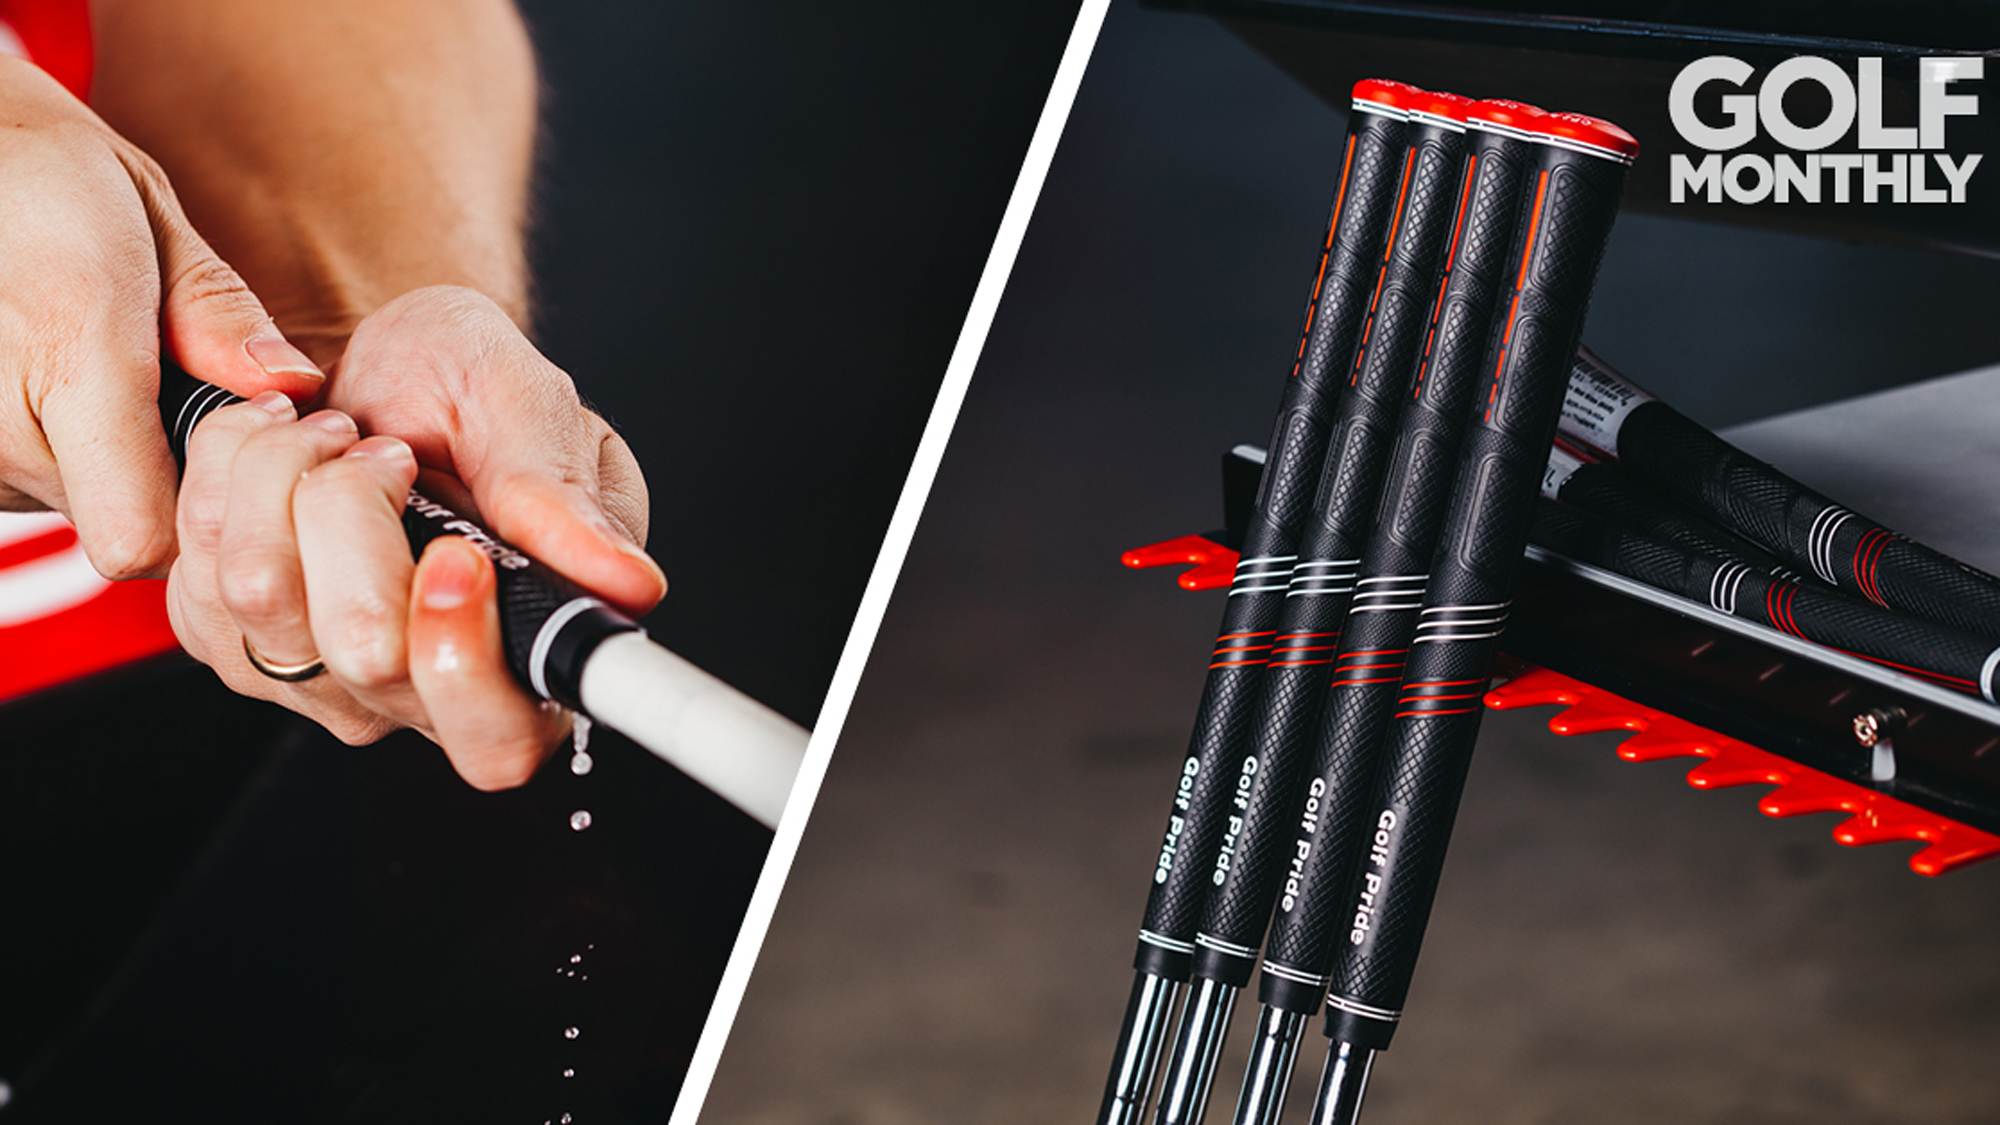 How To Regrip Golf Clubs Yourself - A Step-By-Step Guide